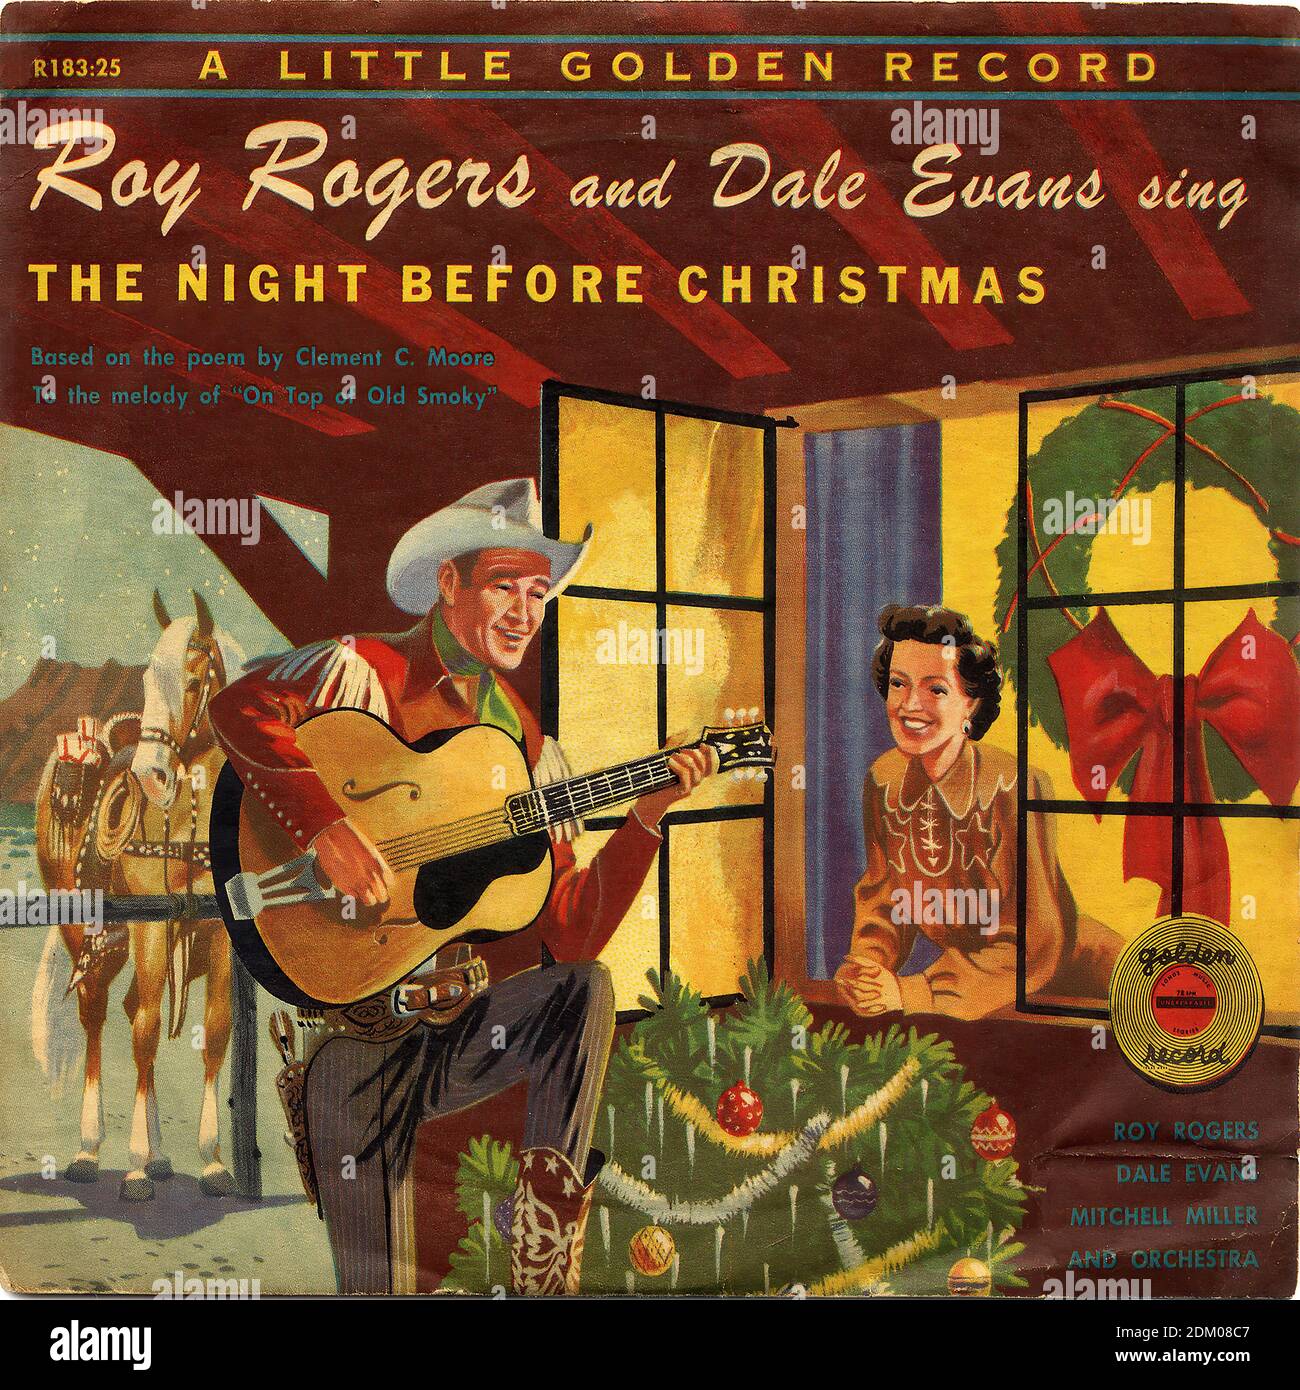 Roy Rogers and Dale Evans Sing the Night Before Christmas - Vintage Record  Cover Stock Photo - Alamy